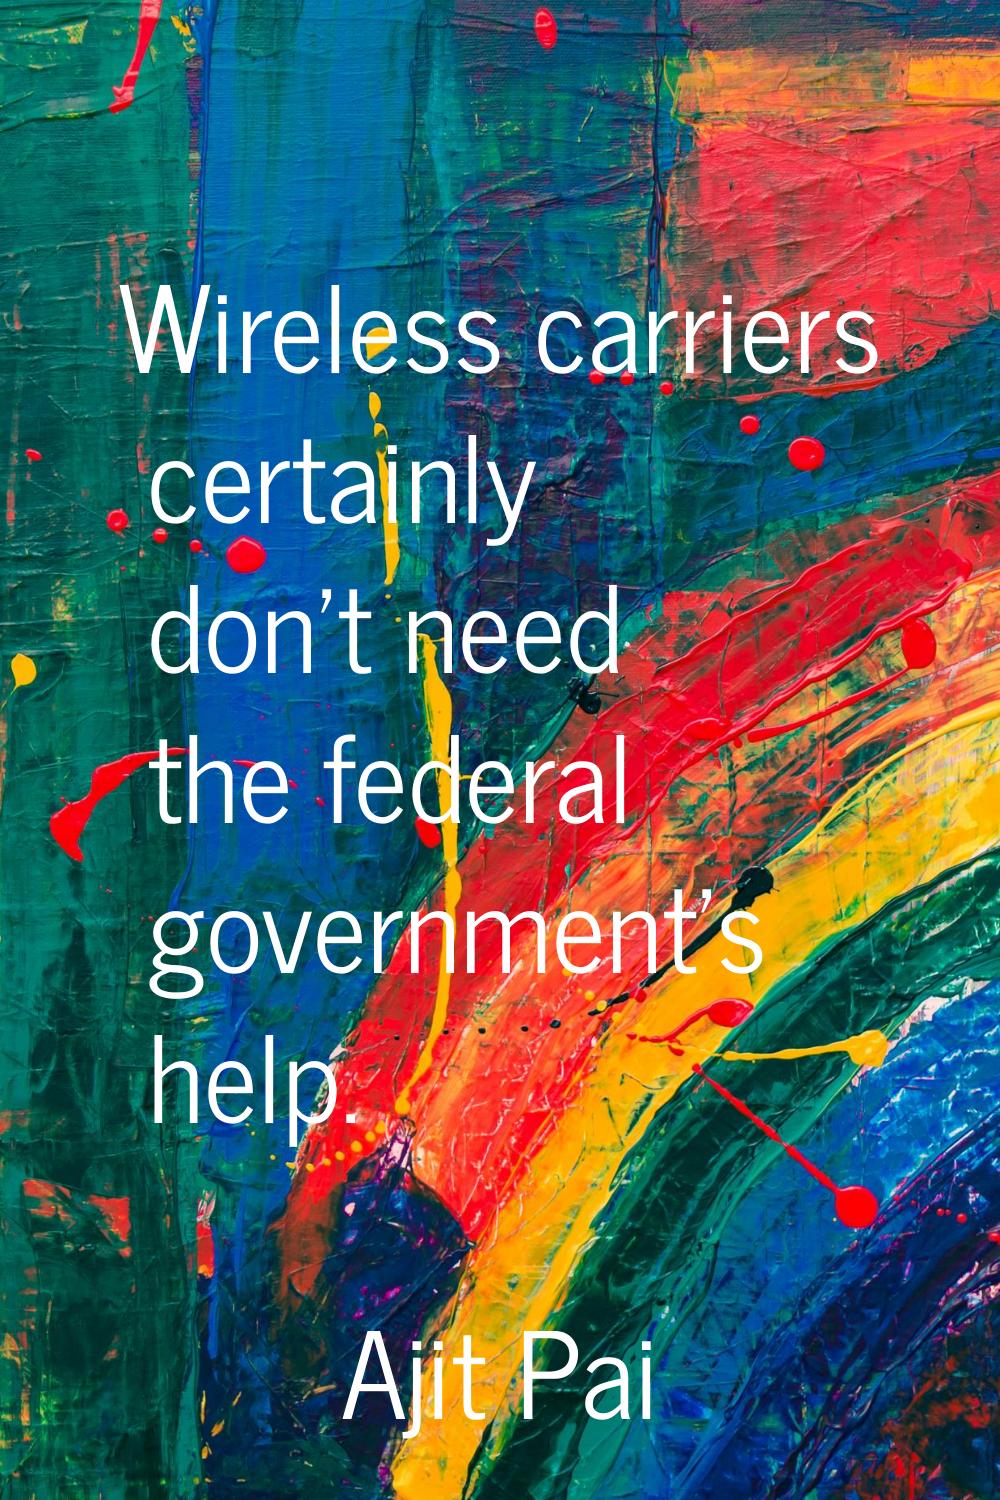 Wireless carriers certainly don't need the federal government's help.